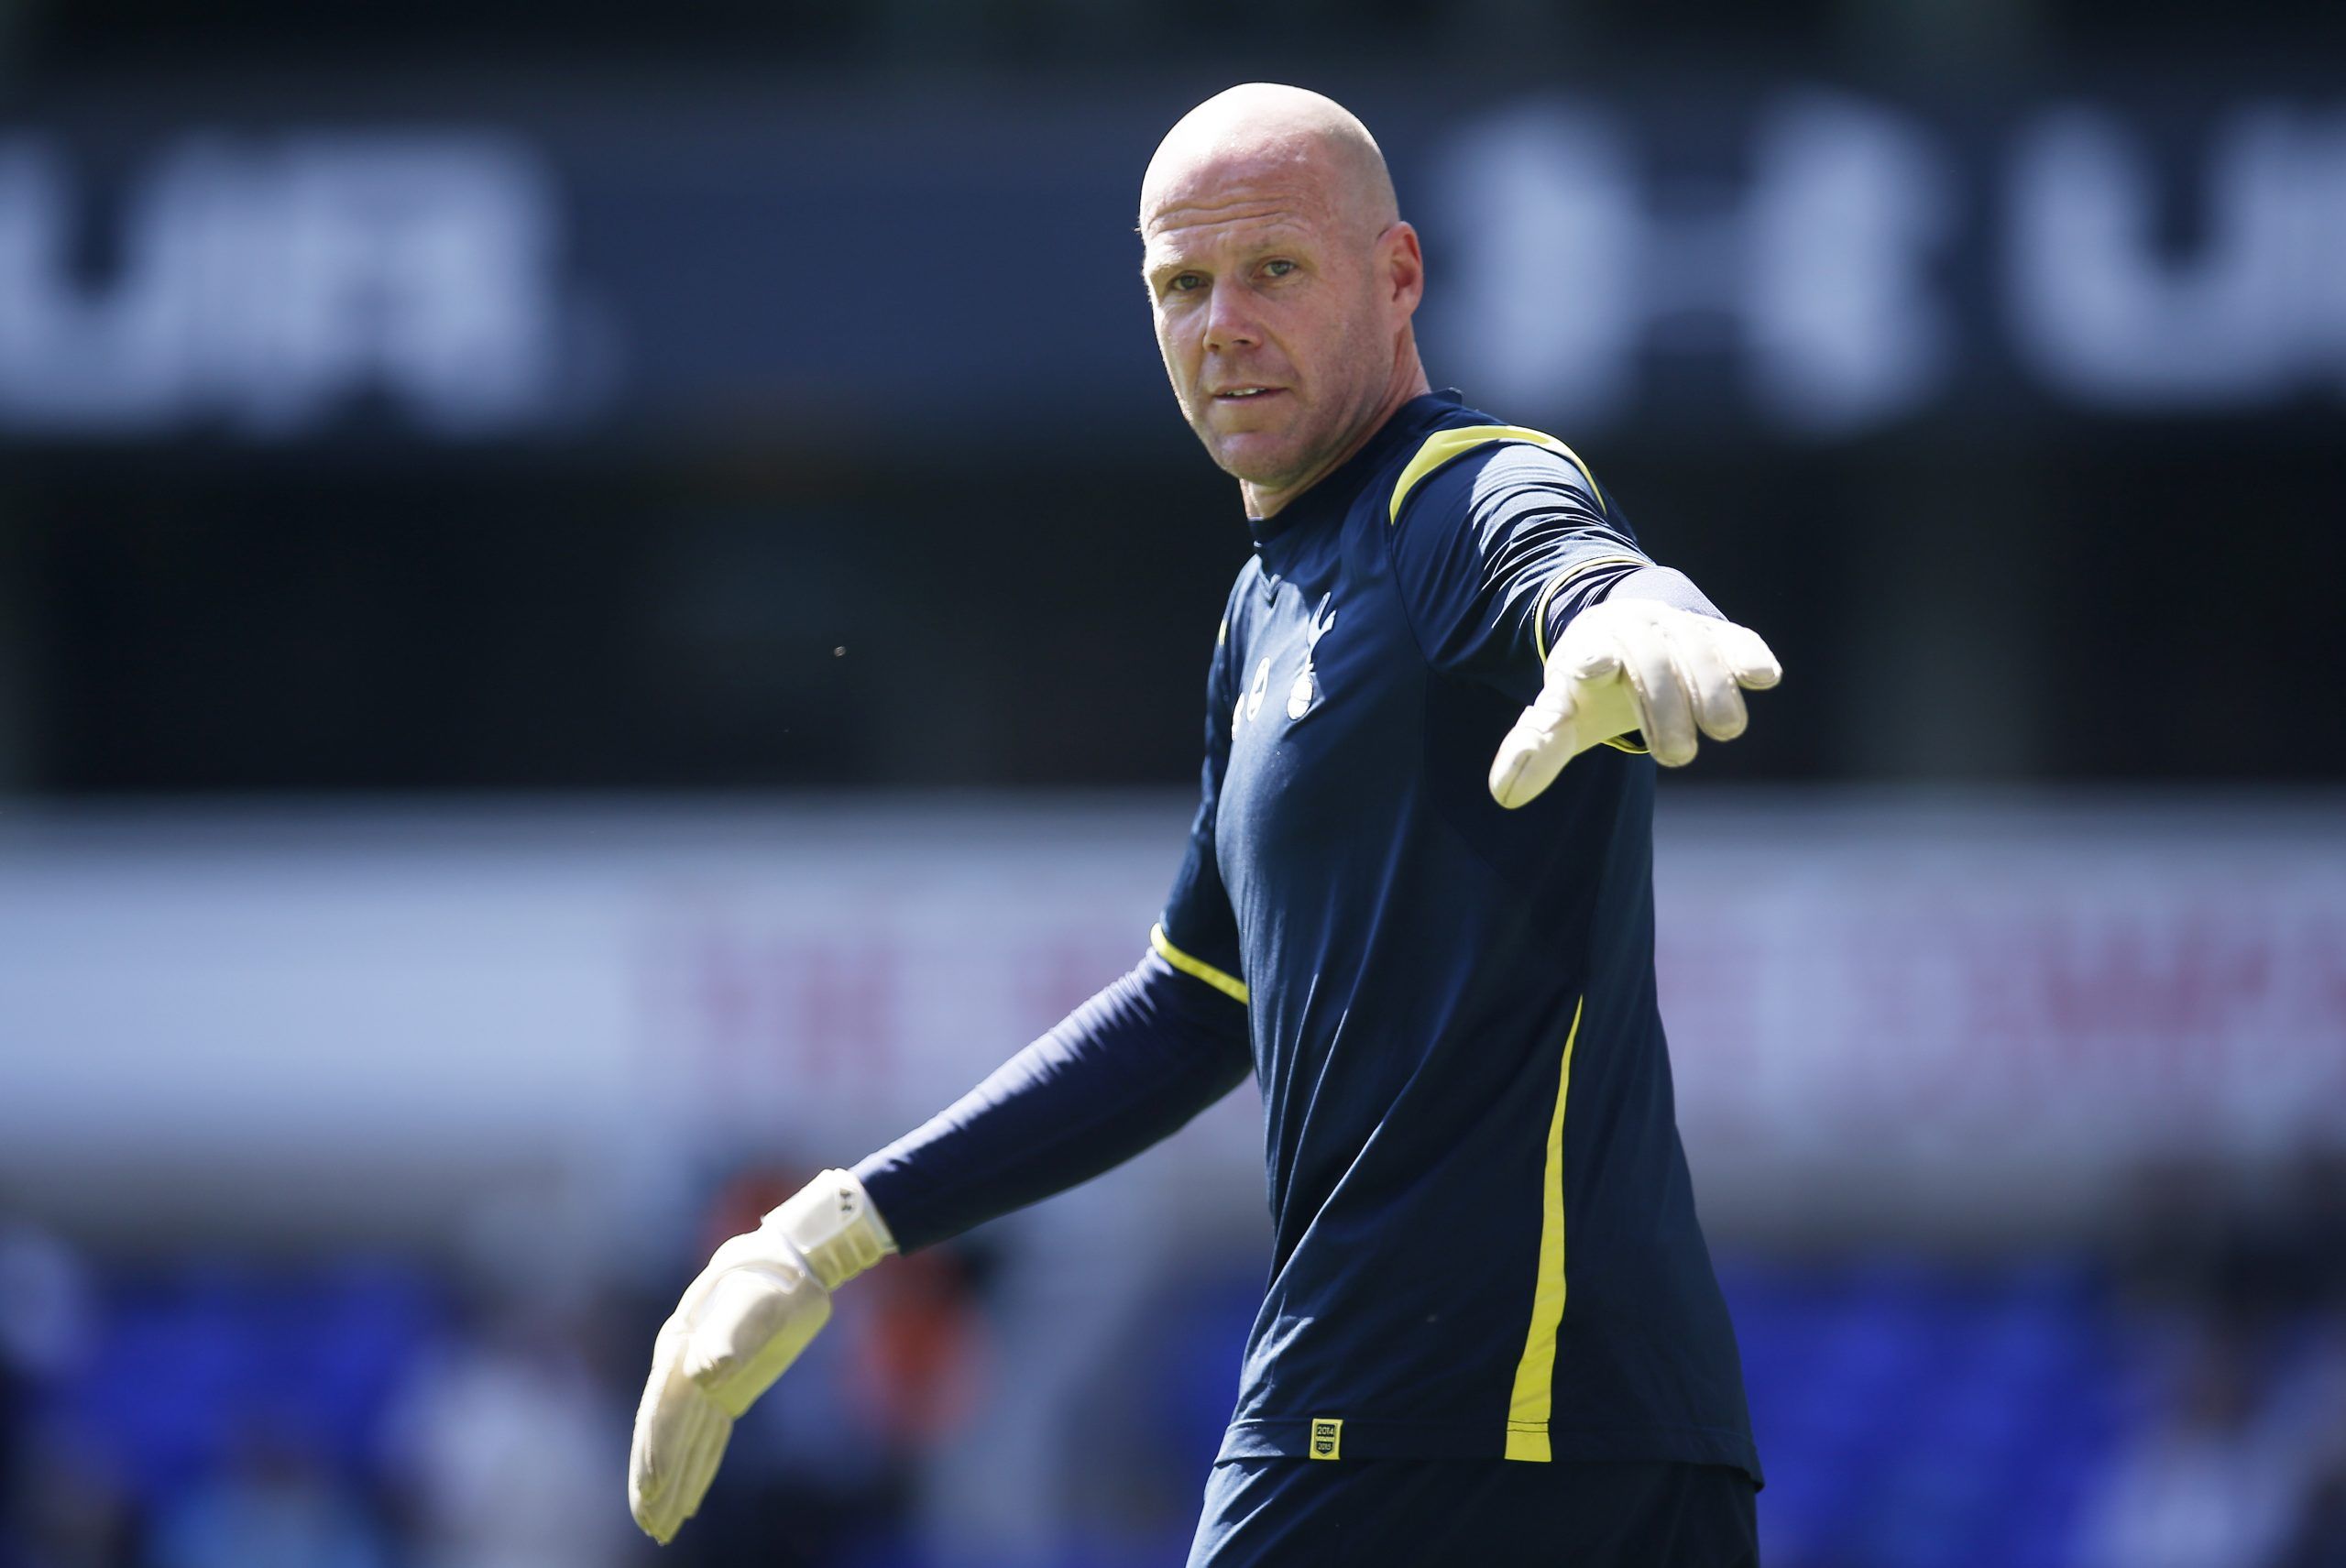 Football - Tottenham Hotspur v Hull City - Barclays Premier League - White Hart Lane - 16/5/15 
Tottenham Hotspur's Brad Friedel warms up before the match 
Mandatory Credit: Action Images / Andrew Couldridge 
Livepic 
EDITORIAL USE ONLY. No use with unauthorized audio, video, data, fixture lists, club/league logos or 